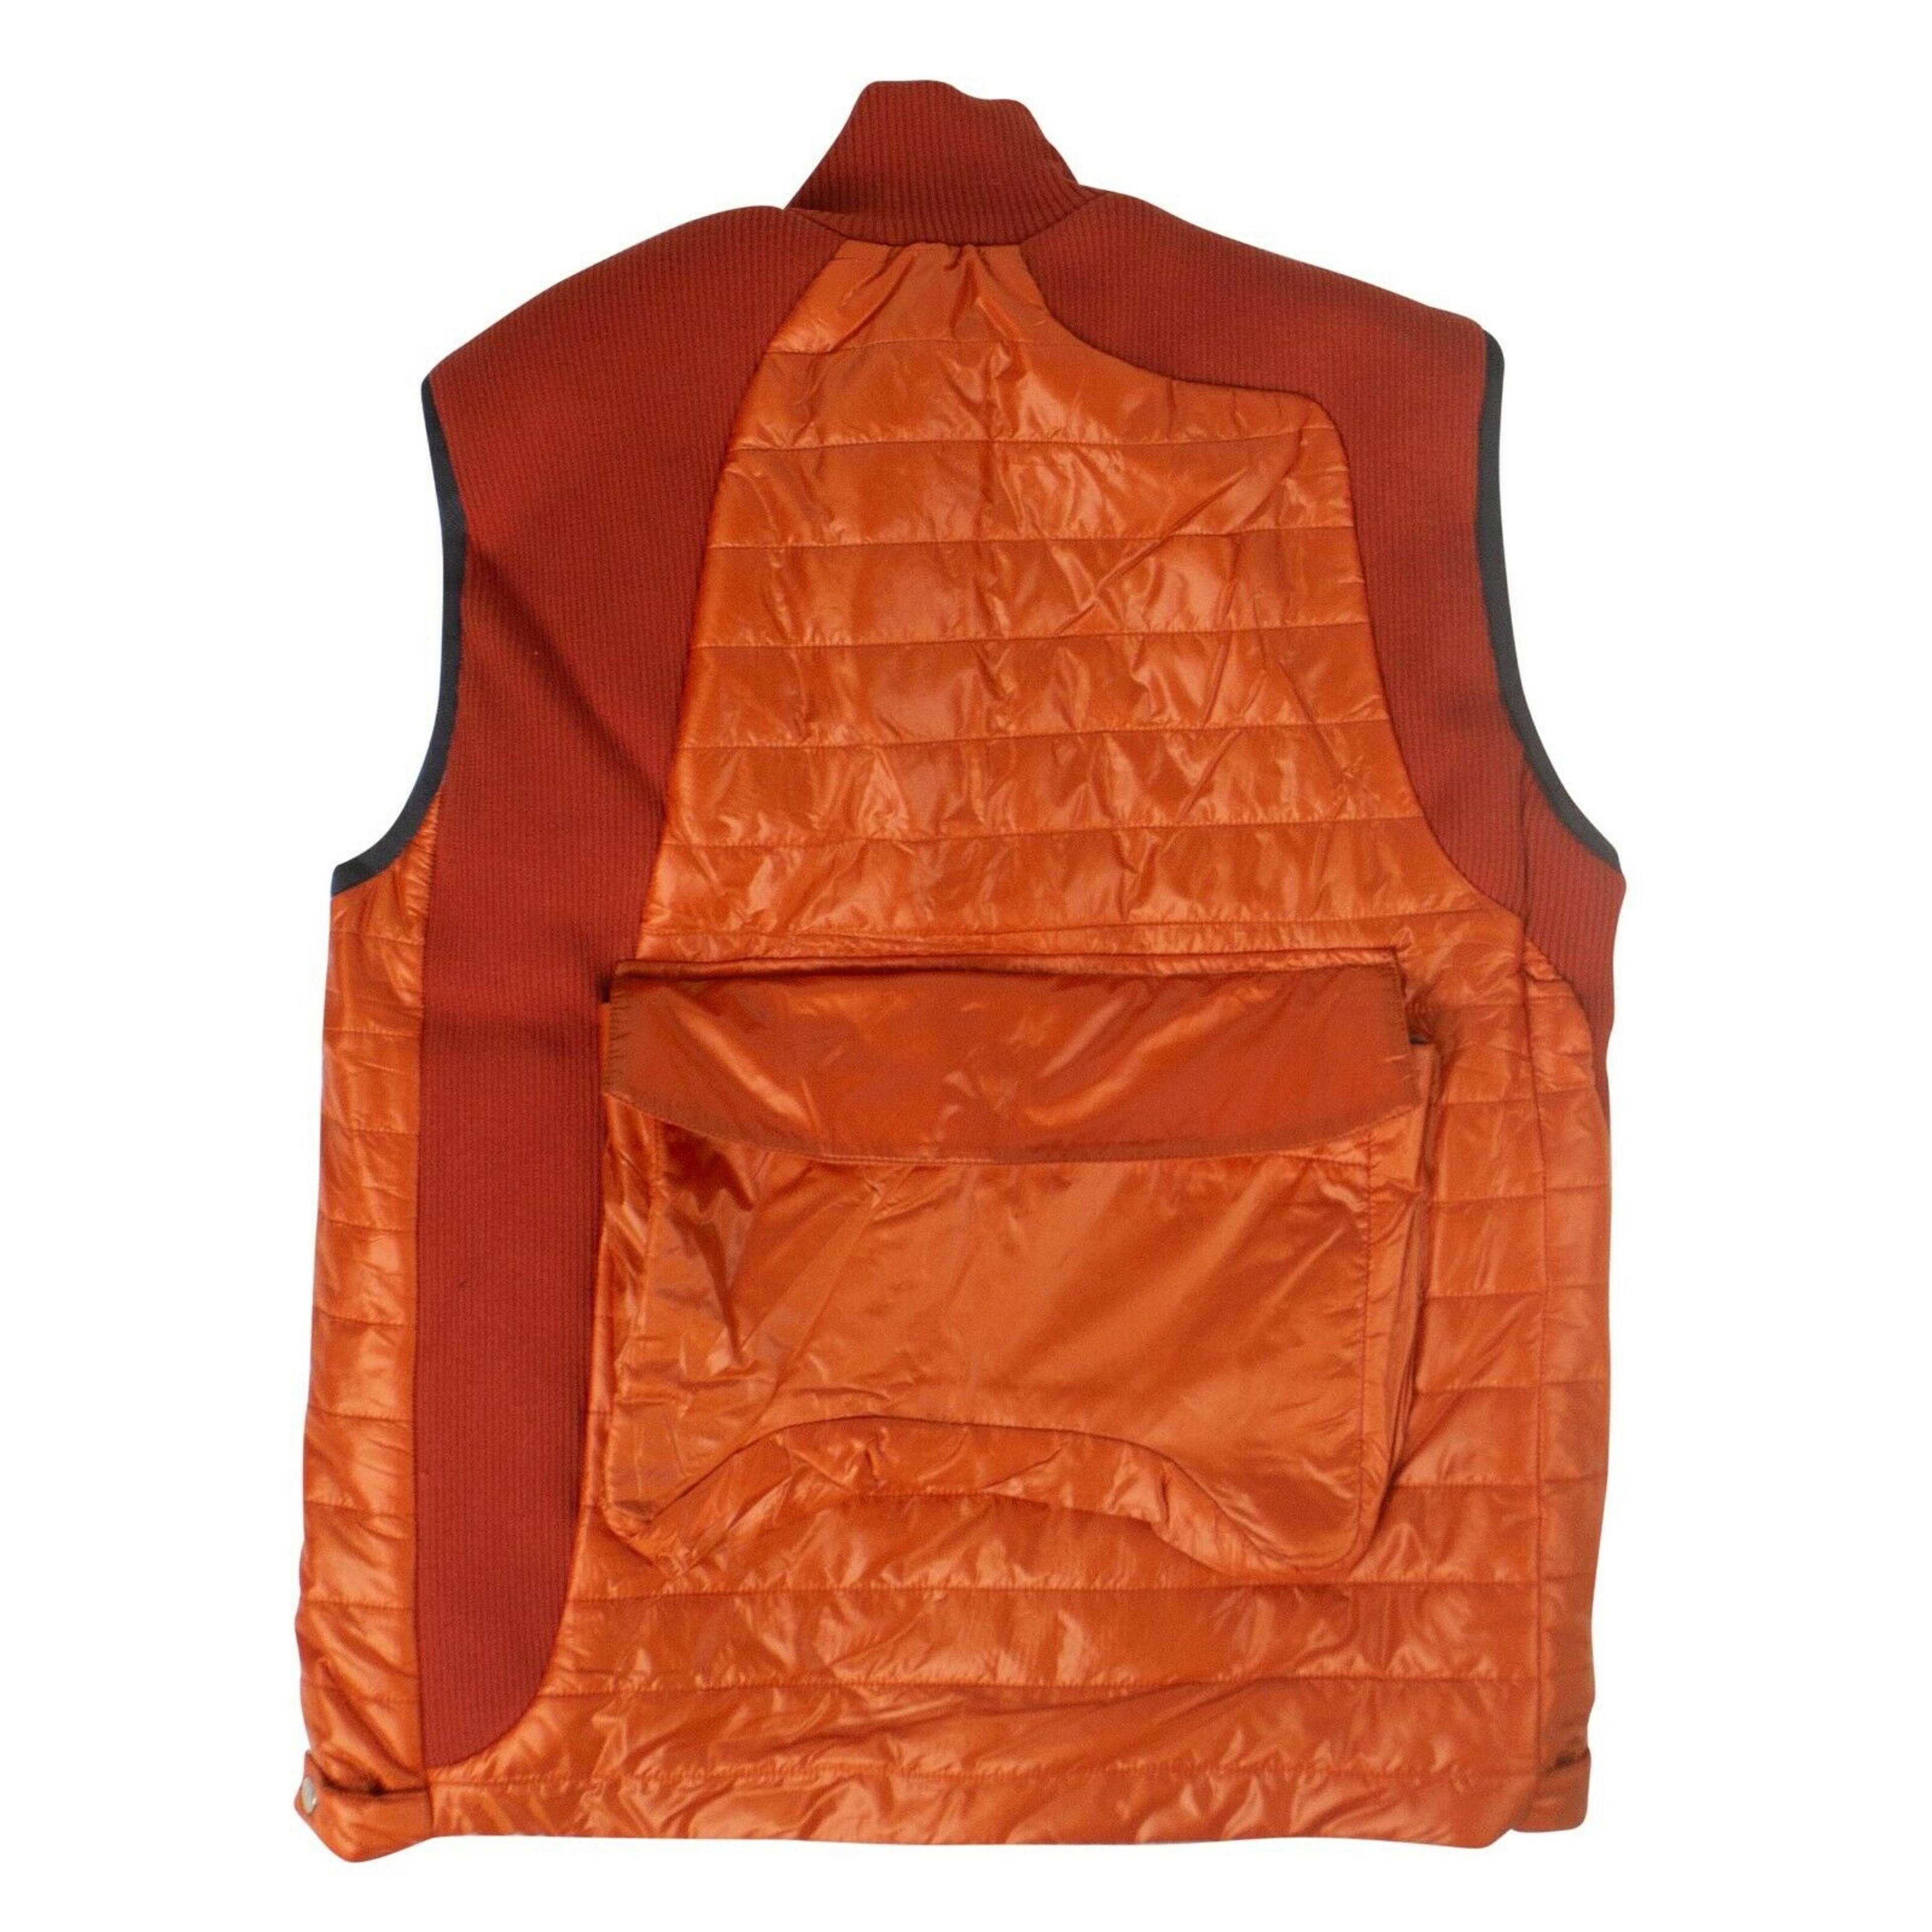 Alternate View 1 of A-COLD-WALL* Men's Puffer Panelled Jacket Vest - Orange